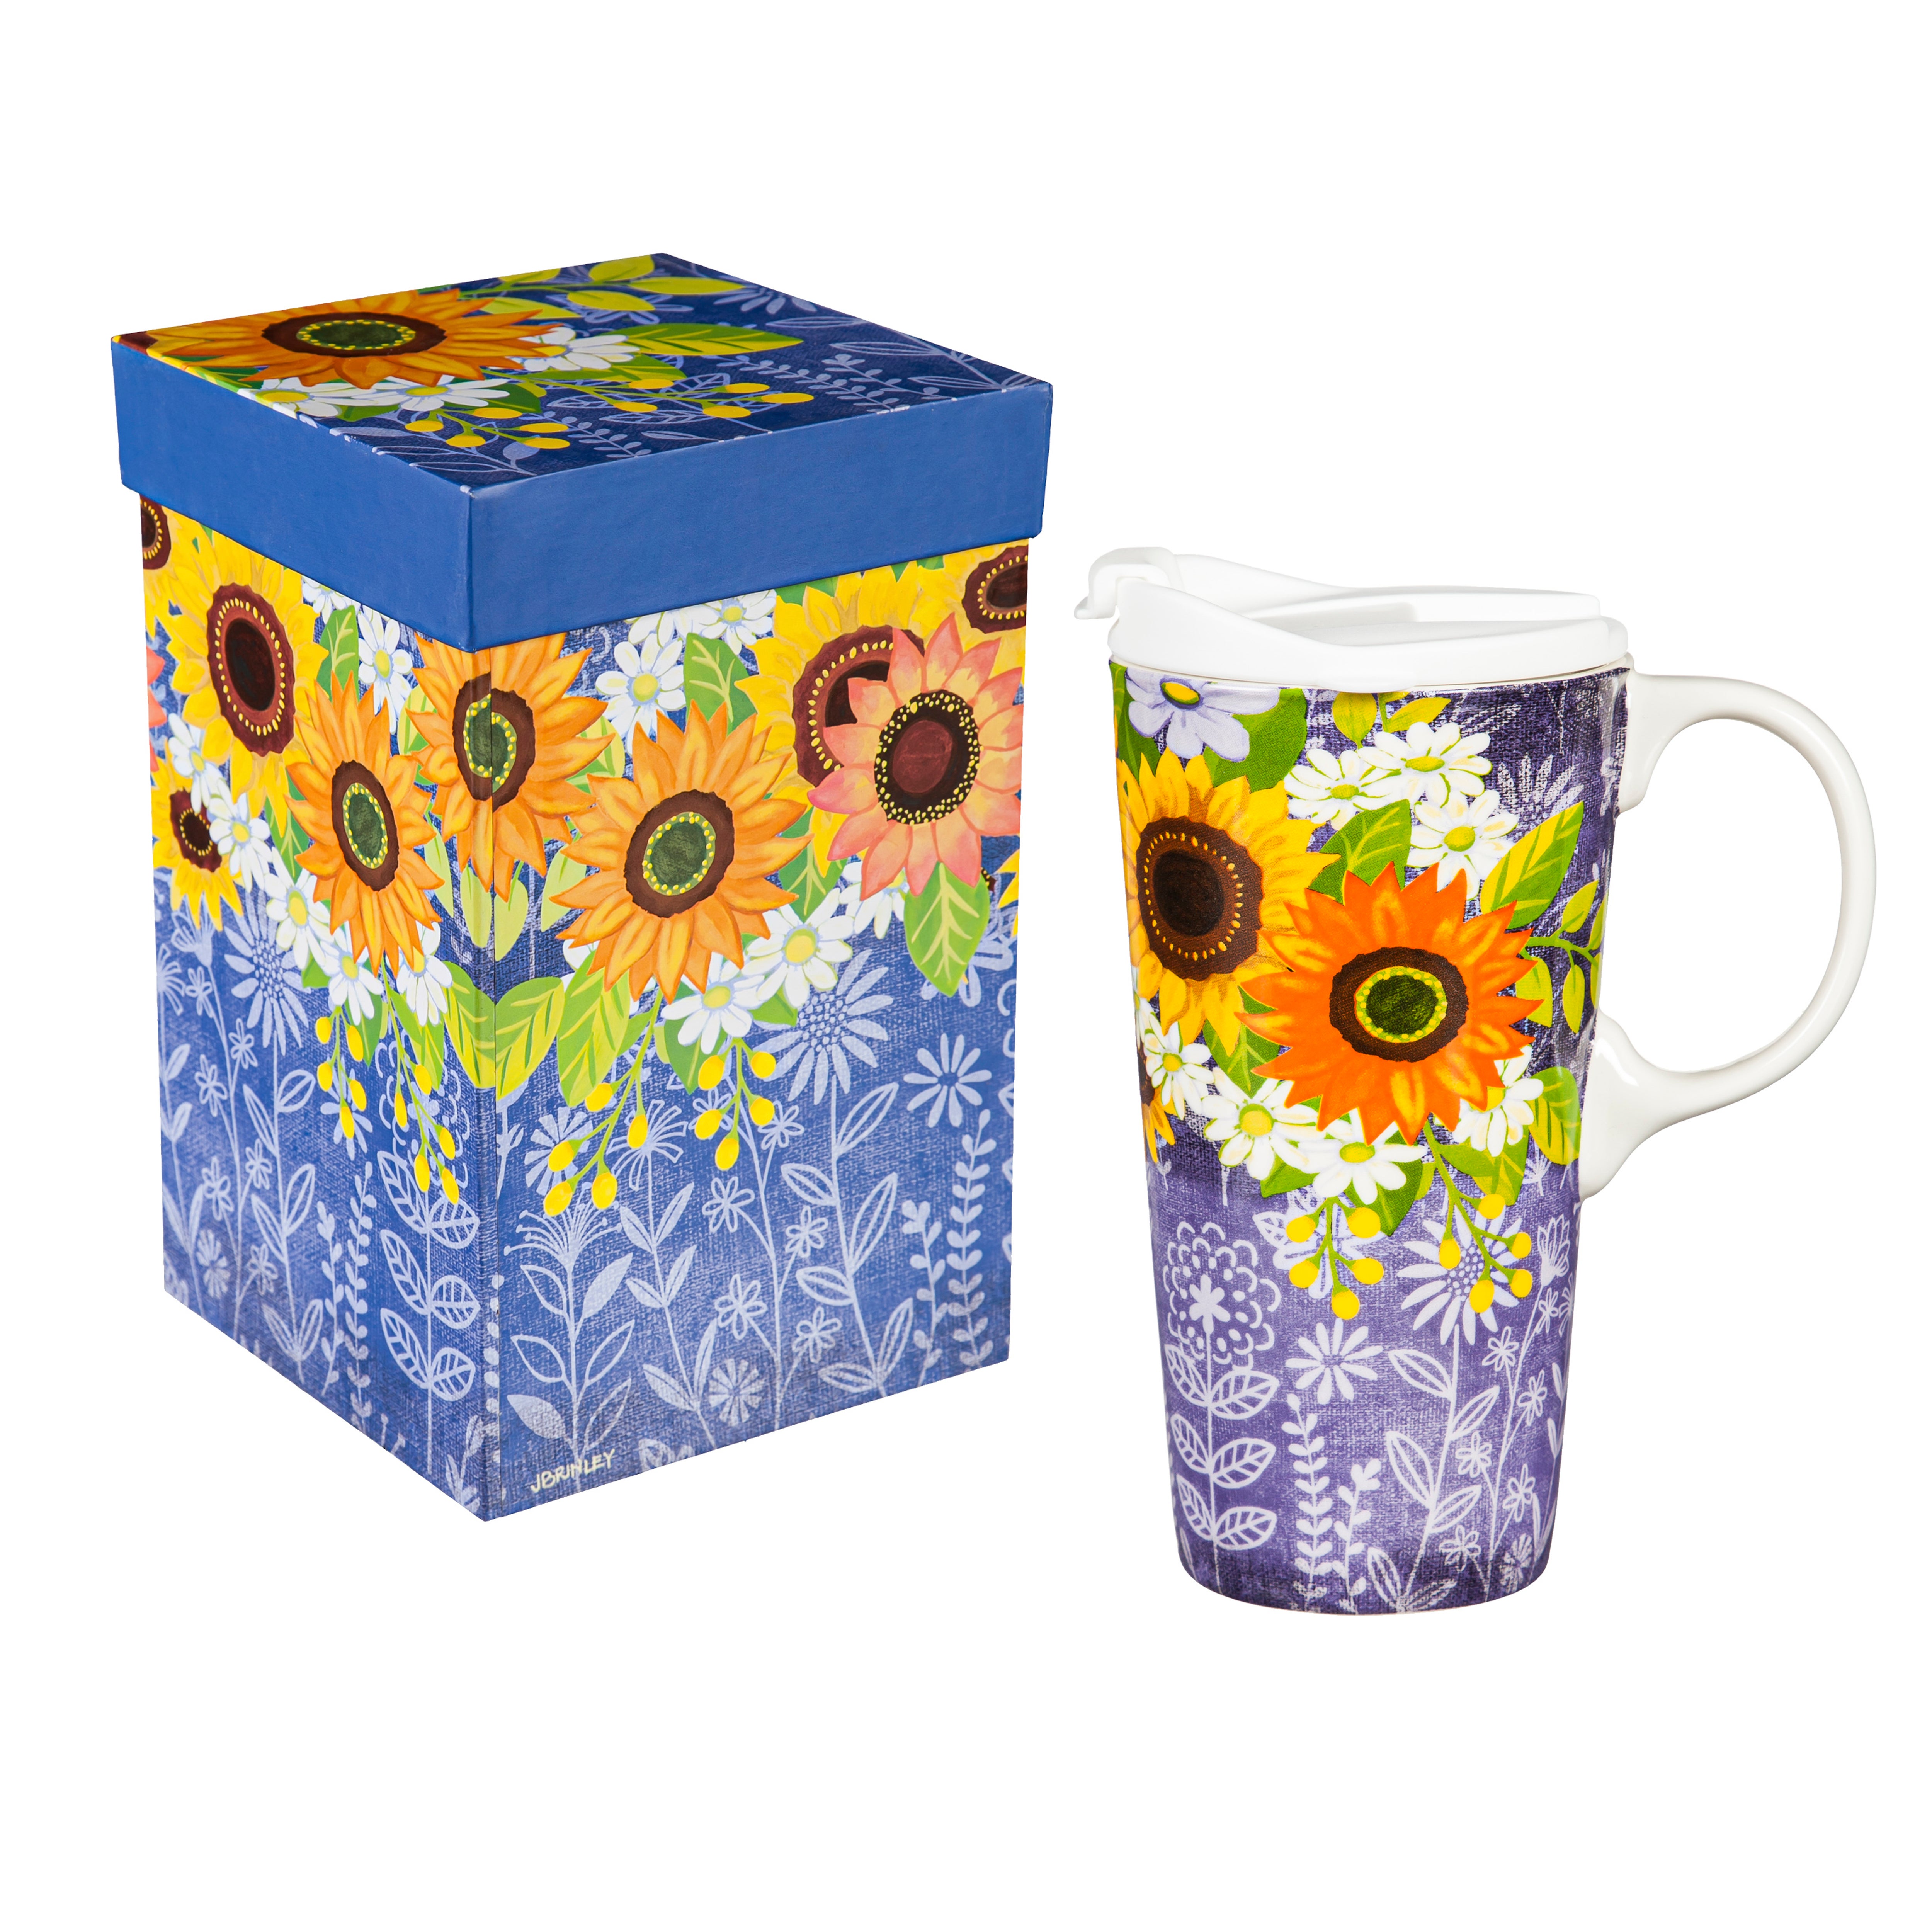 Sunflowers and Daisies Ceramic 17 oz. Travel Cup with Gift Box